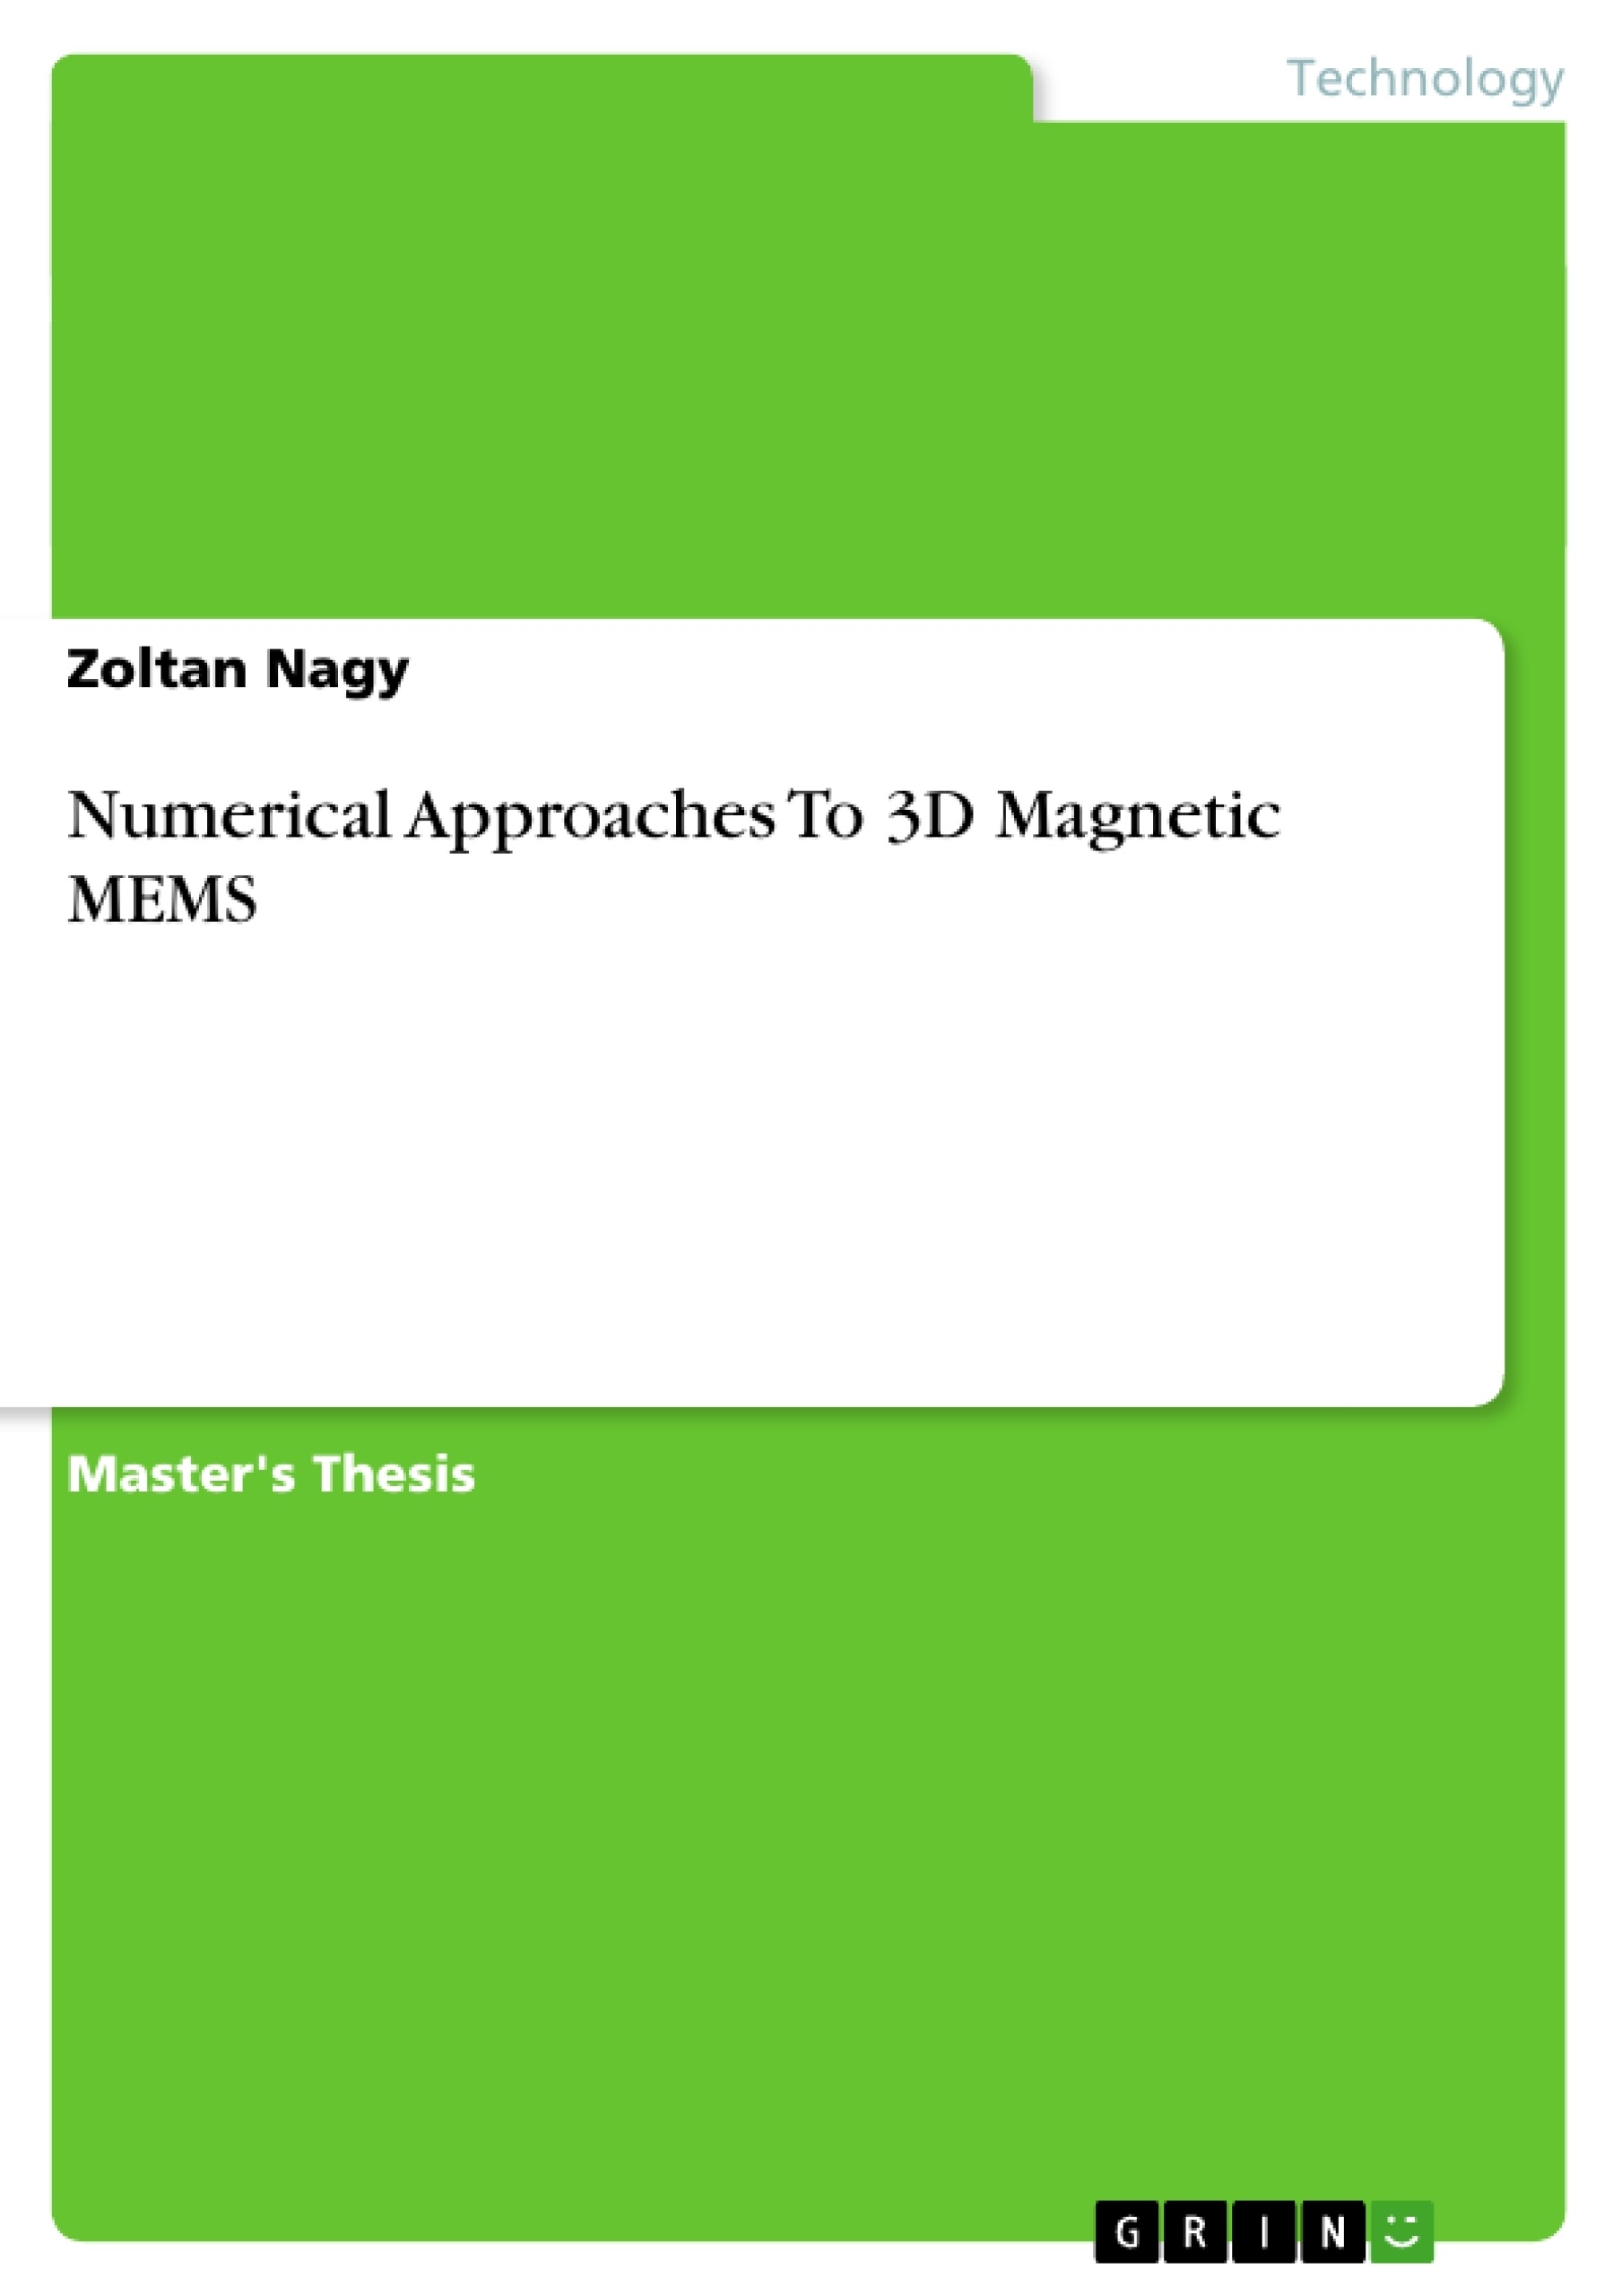 Título: Numerical Approaches To 3D Magnetic MEMS